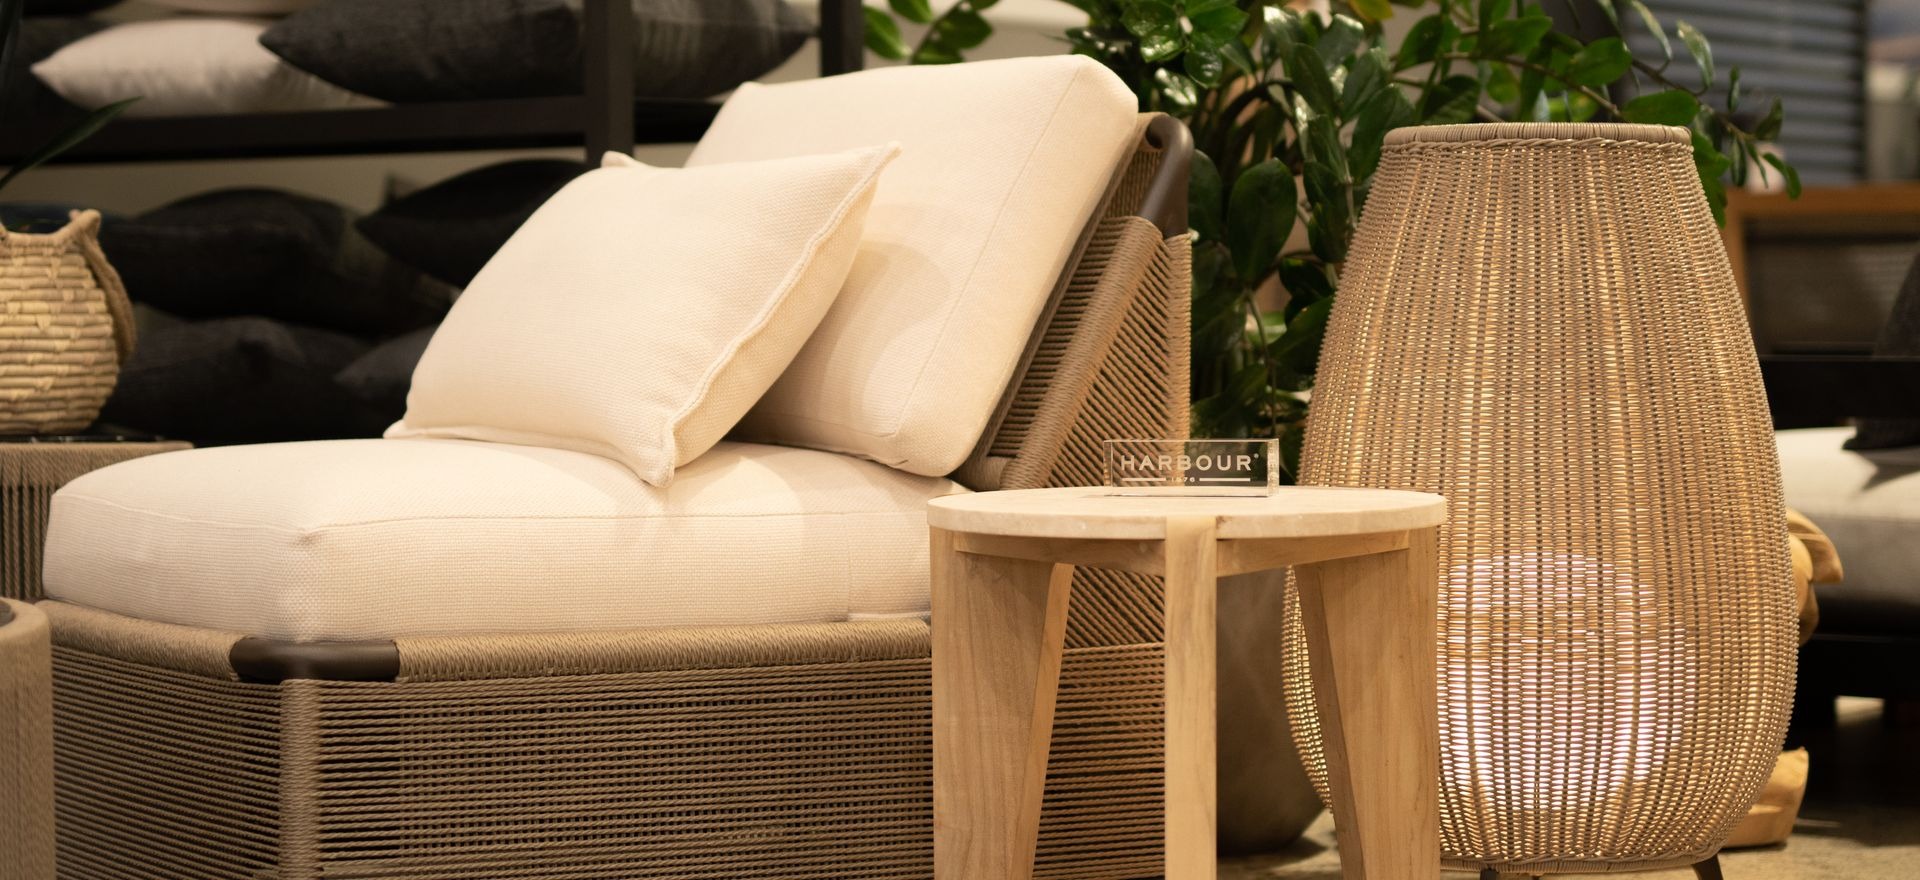 New design collaboration partners handcrafted outdoor furniture with European lighting to spruce up Aussie backyards